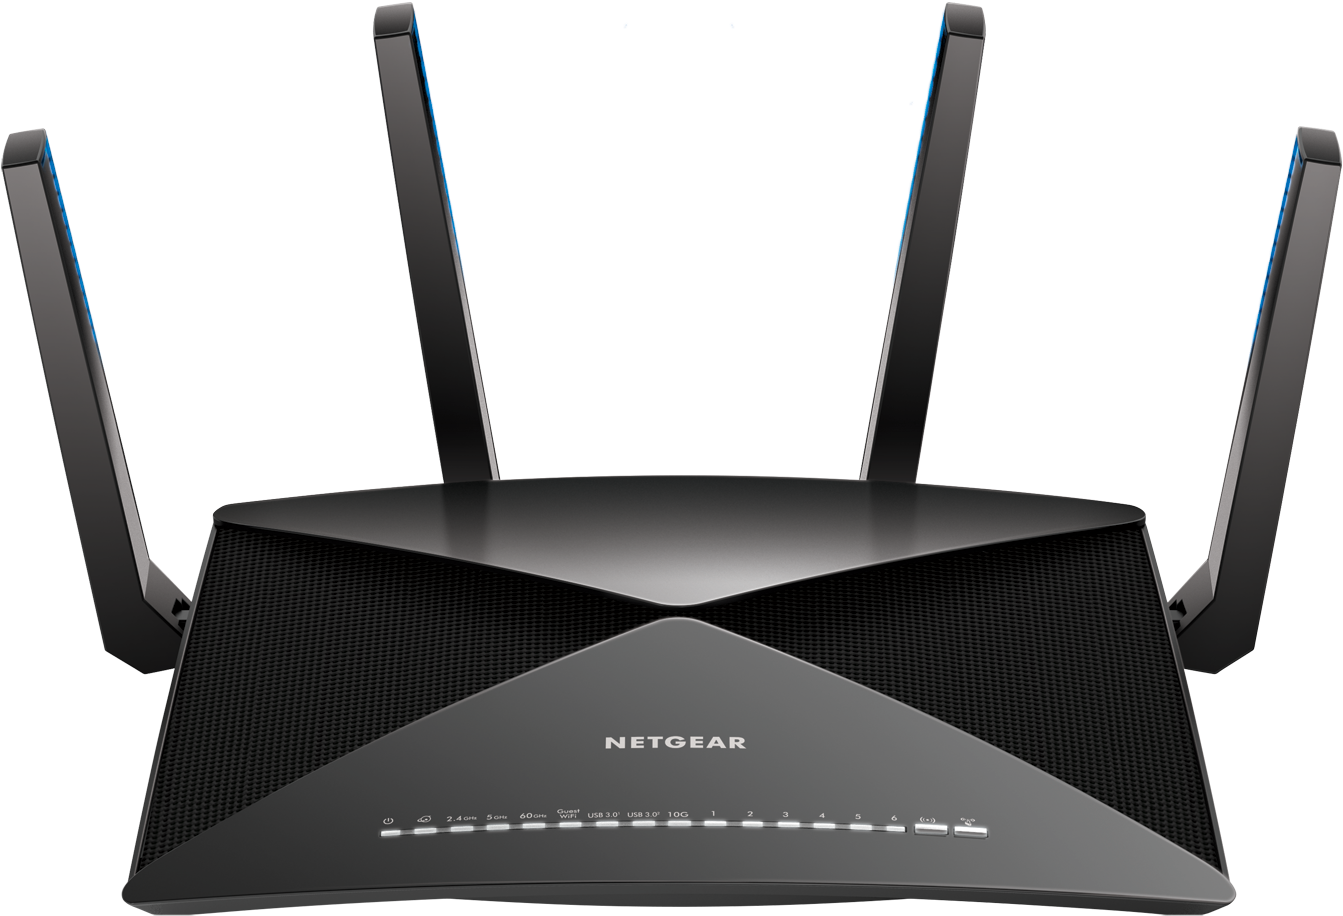 A Black Router With Two Antennas